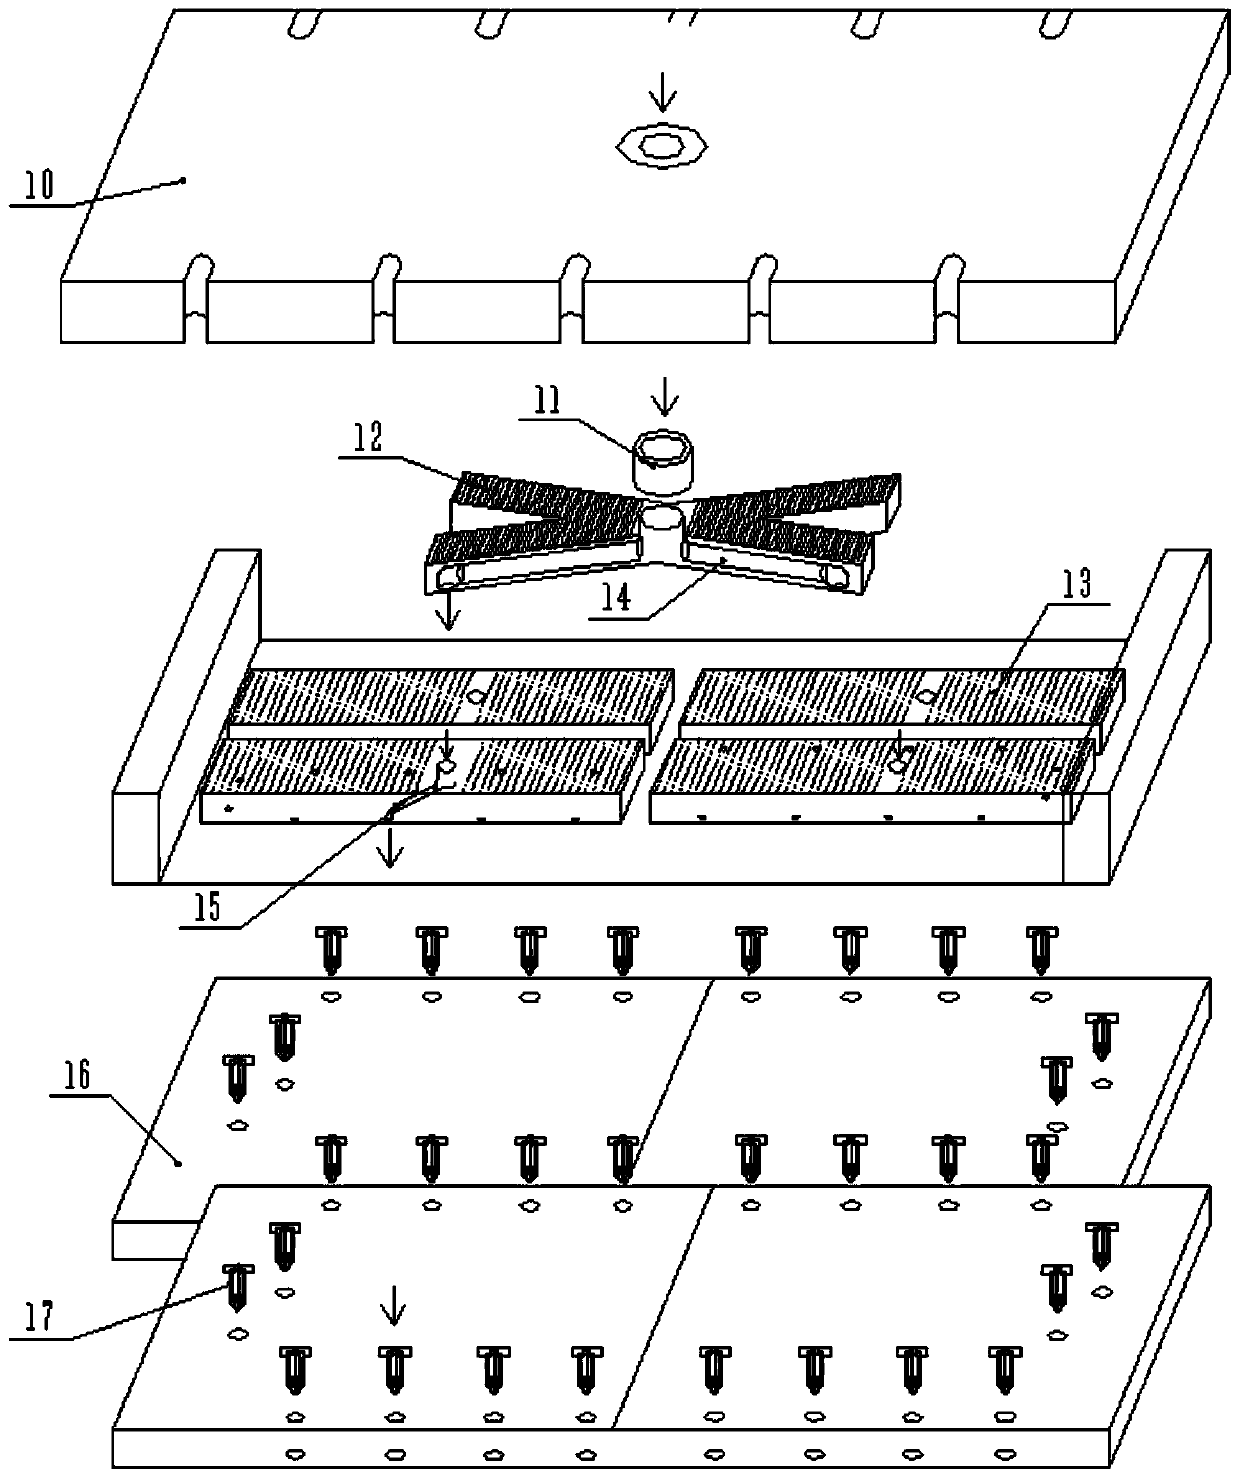 Production method of floors capable of being quickly installed in side sliding mode